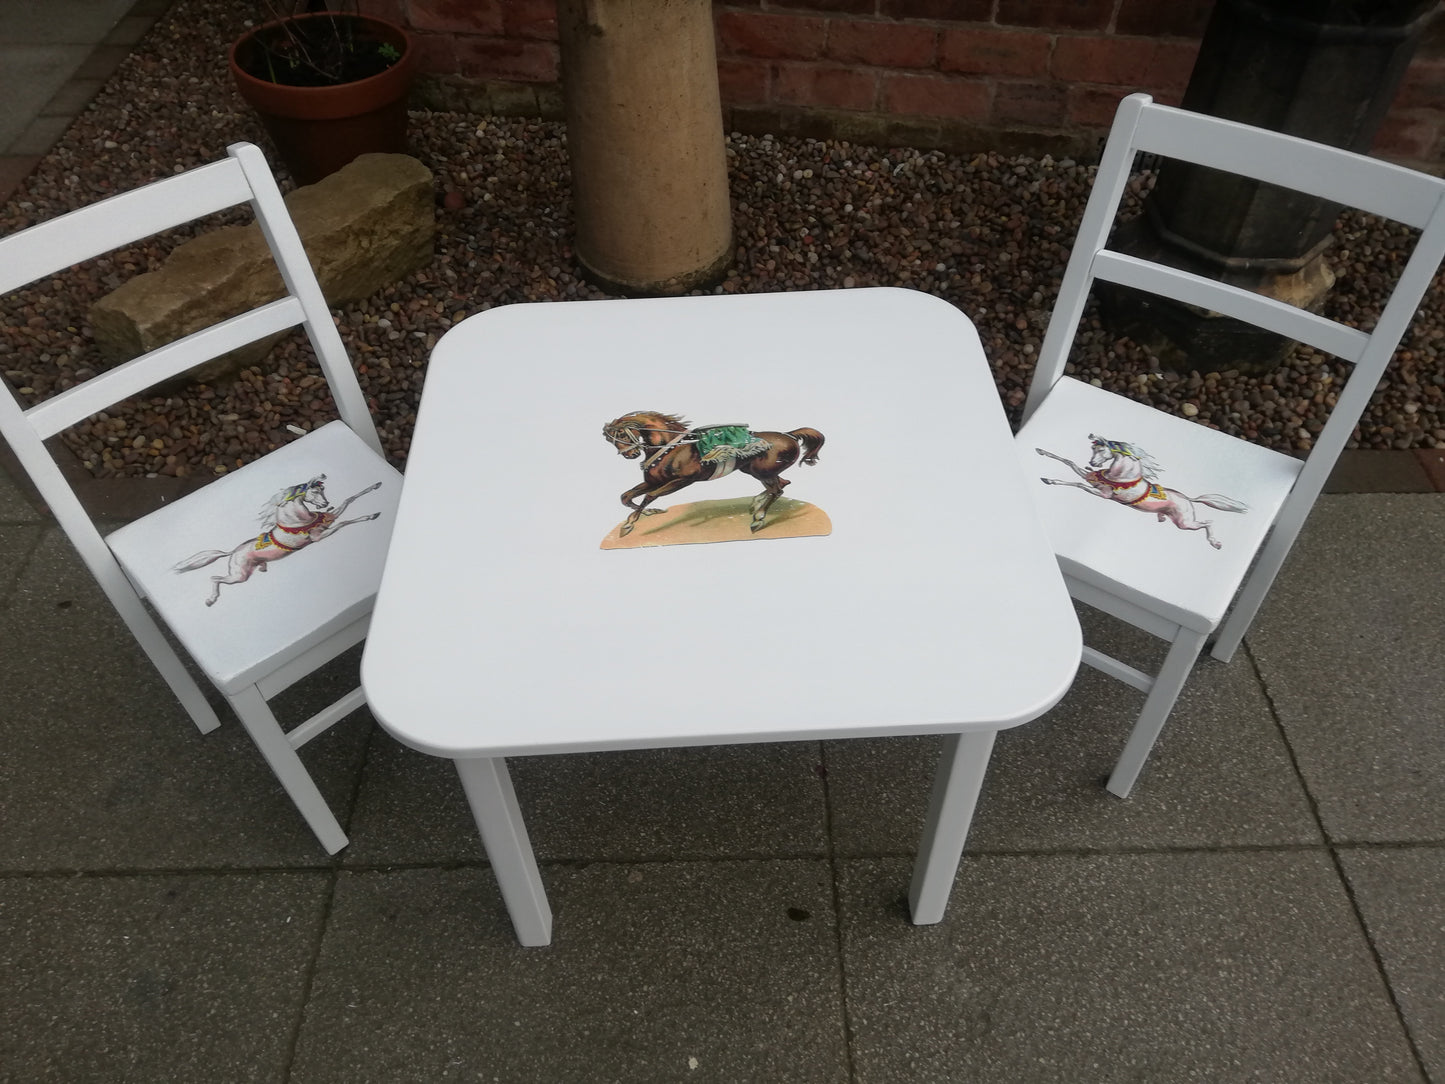 Commission for Rachel personalised children's chairs and table